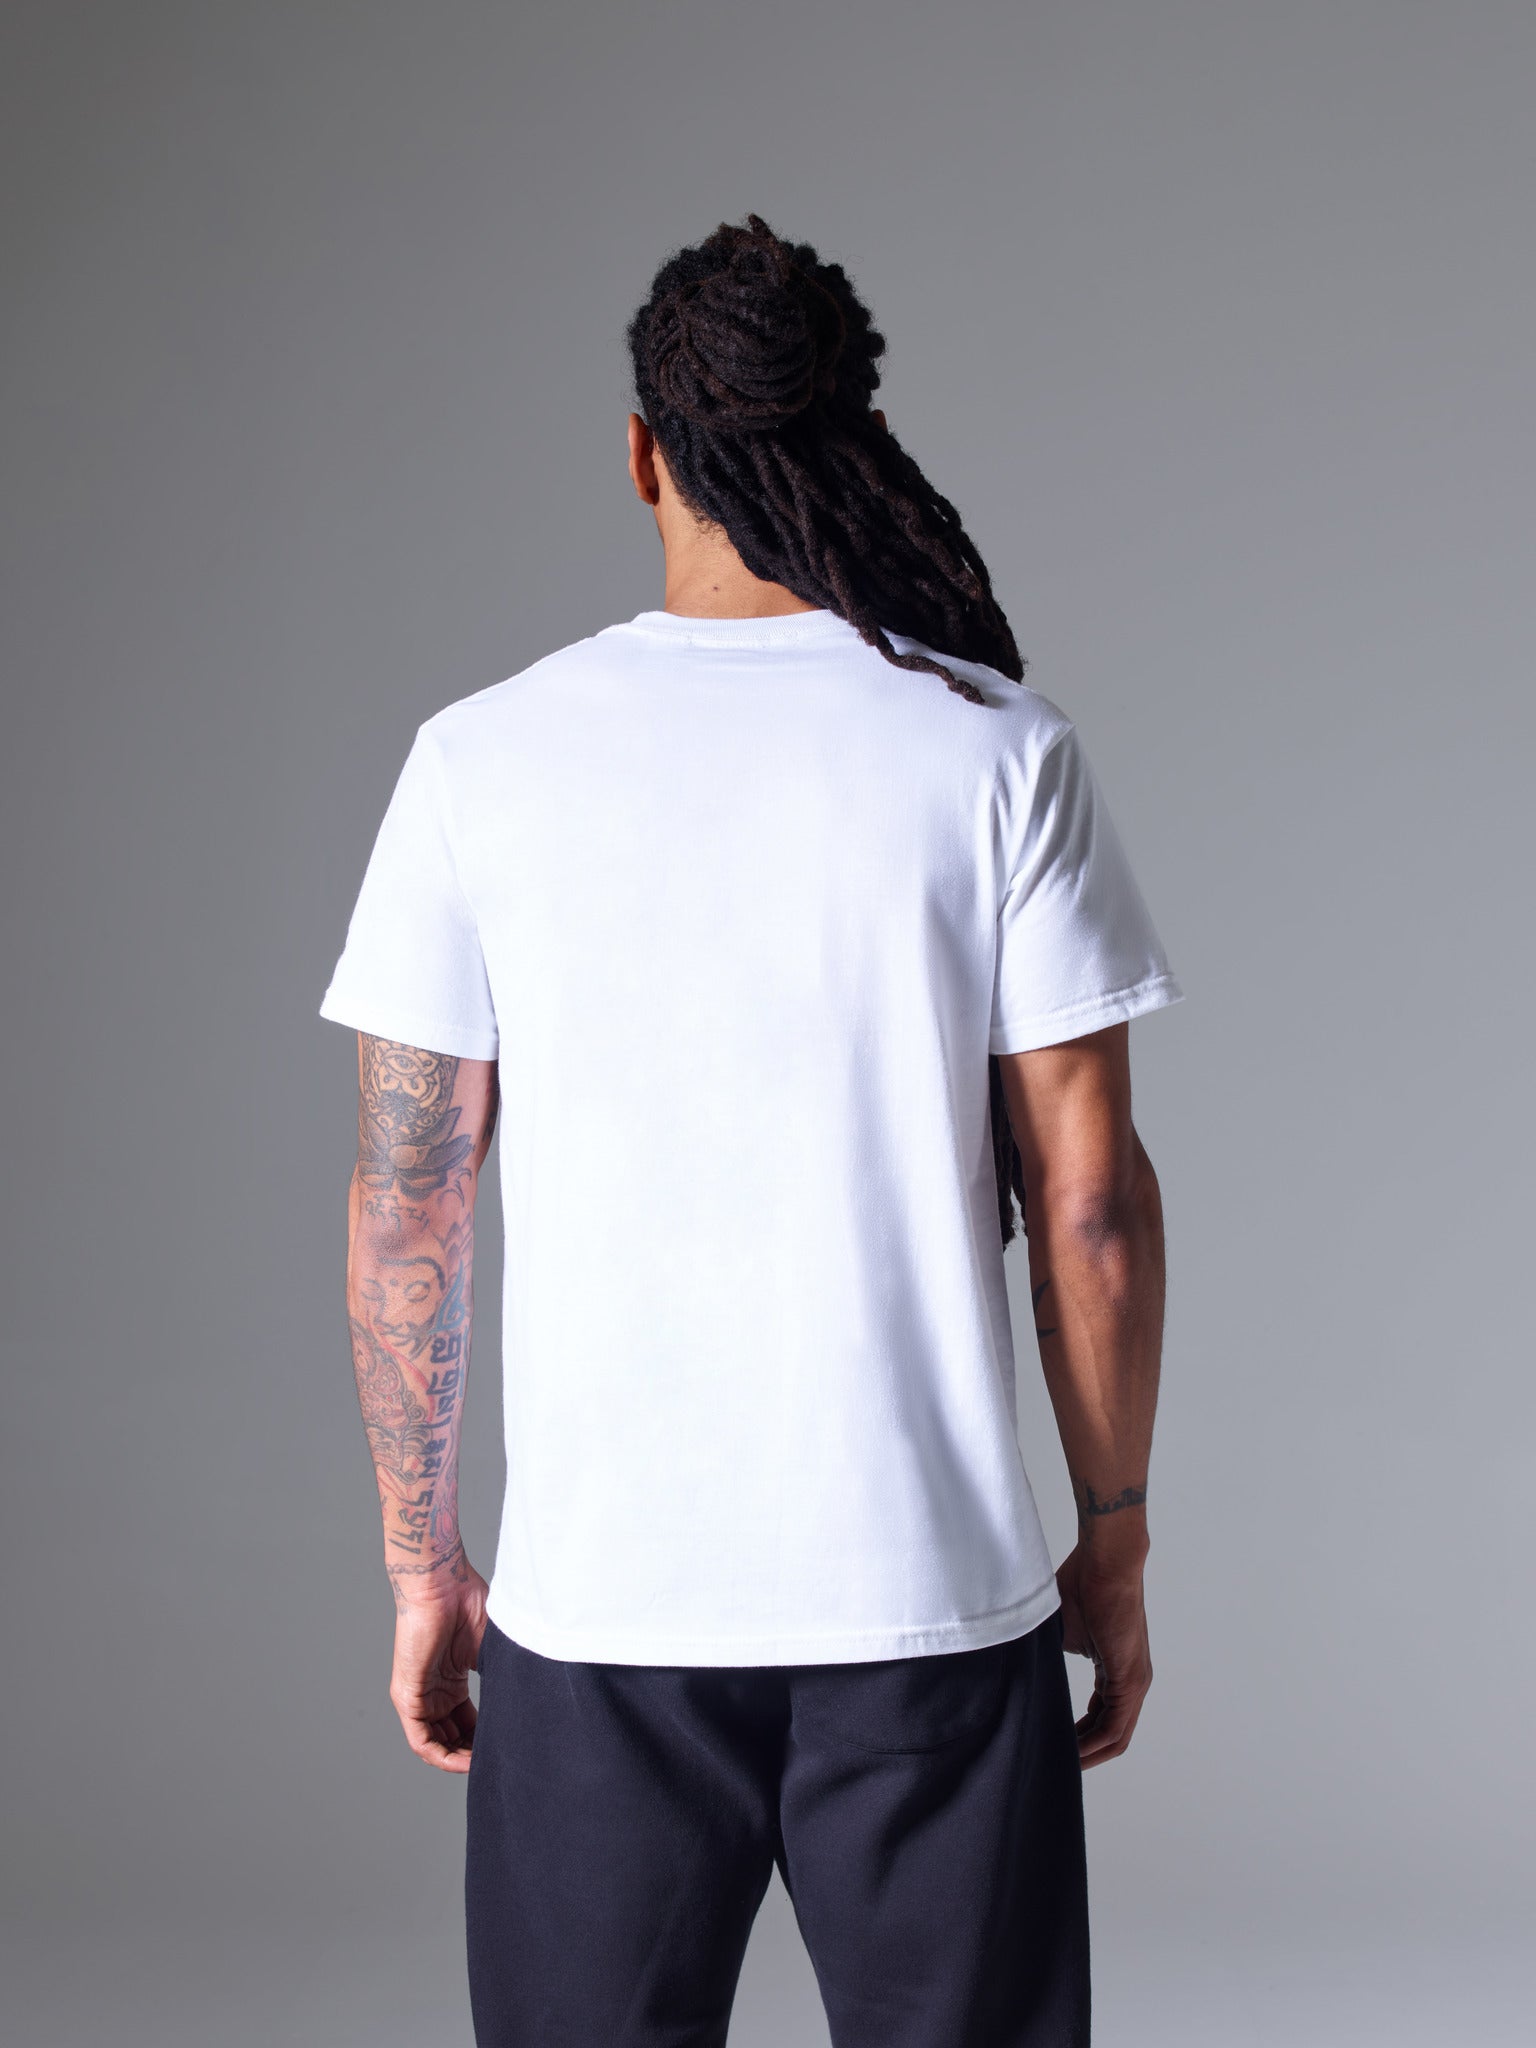 A back shot of a male model wearing the PONY Classics White T-Shirt and blue PONY Classics jogger.